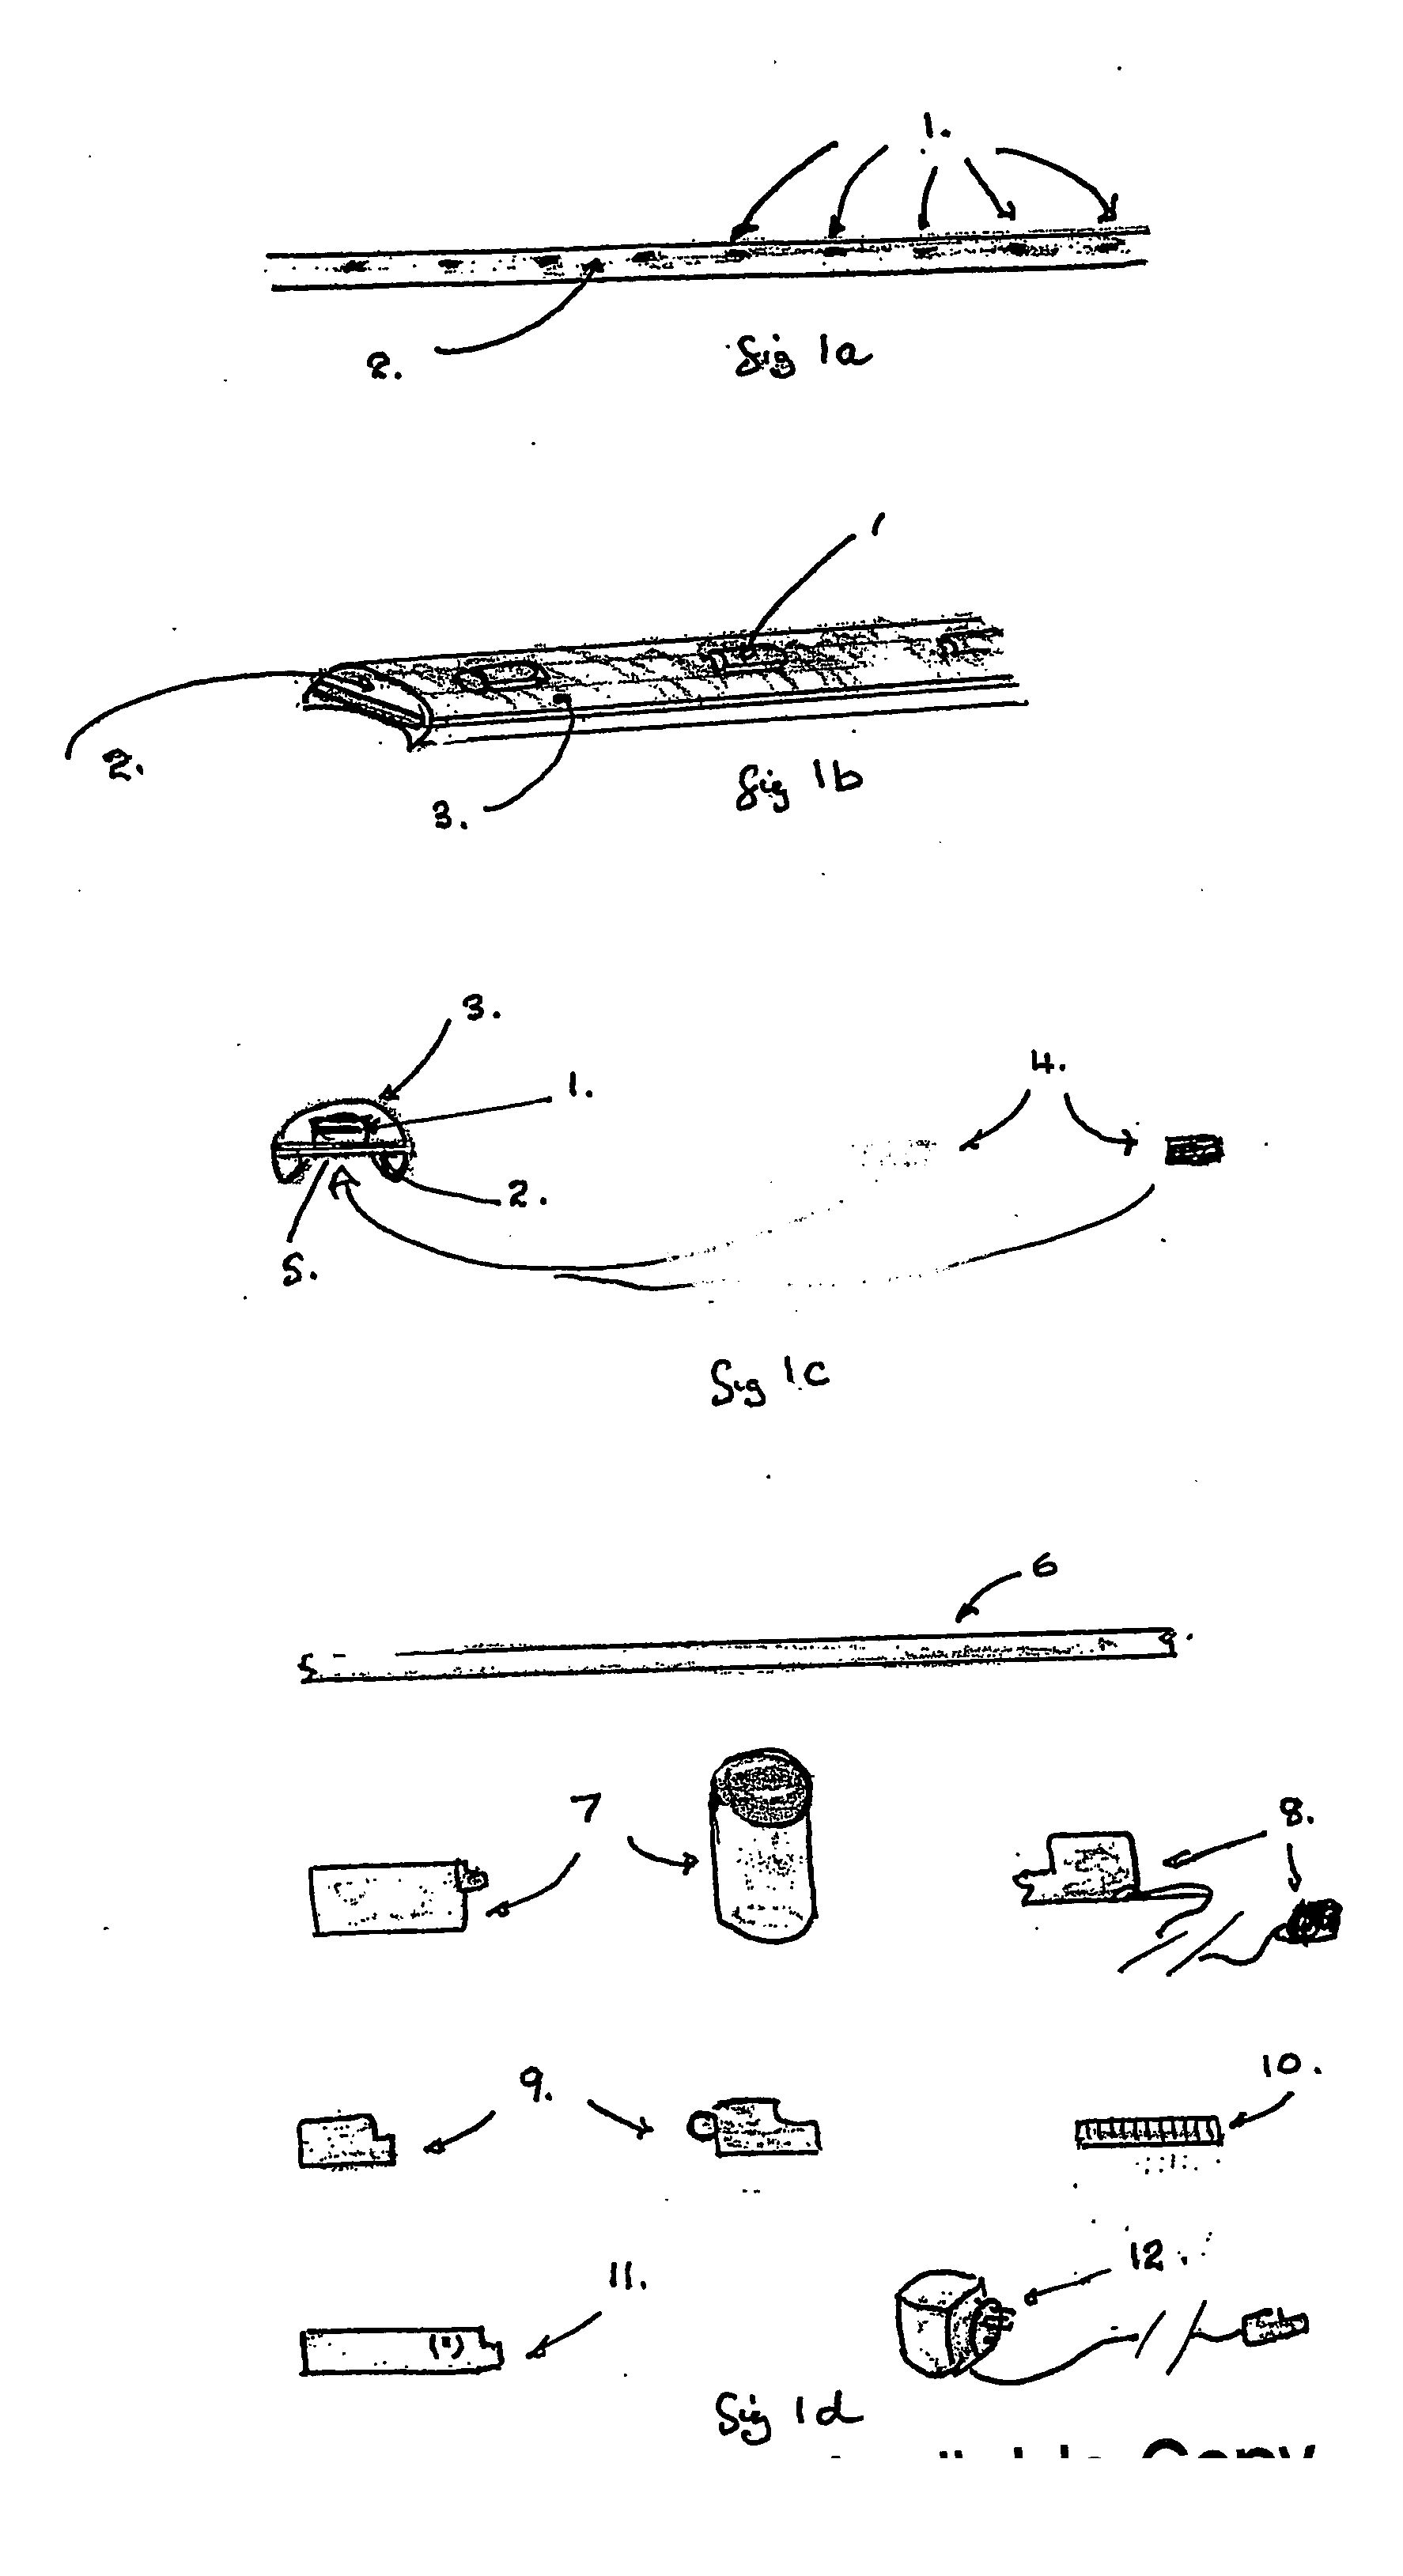 Methods and apparatus relating to improved visual recognition and safety